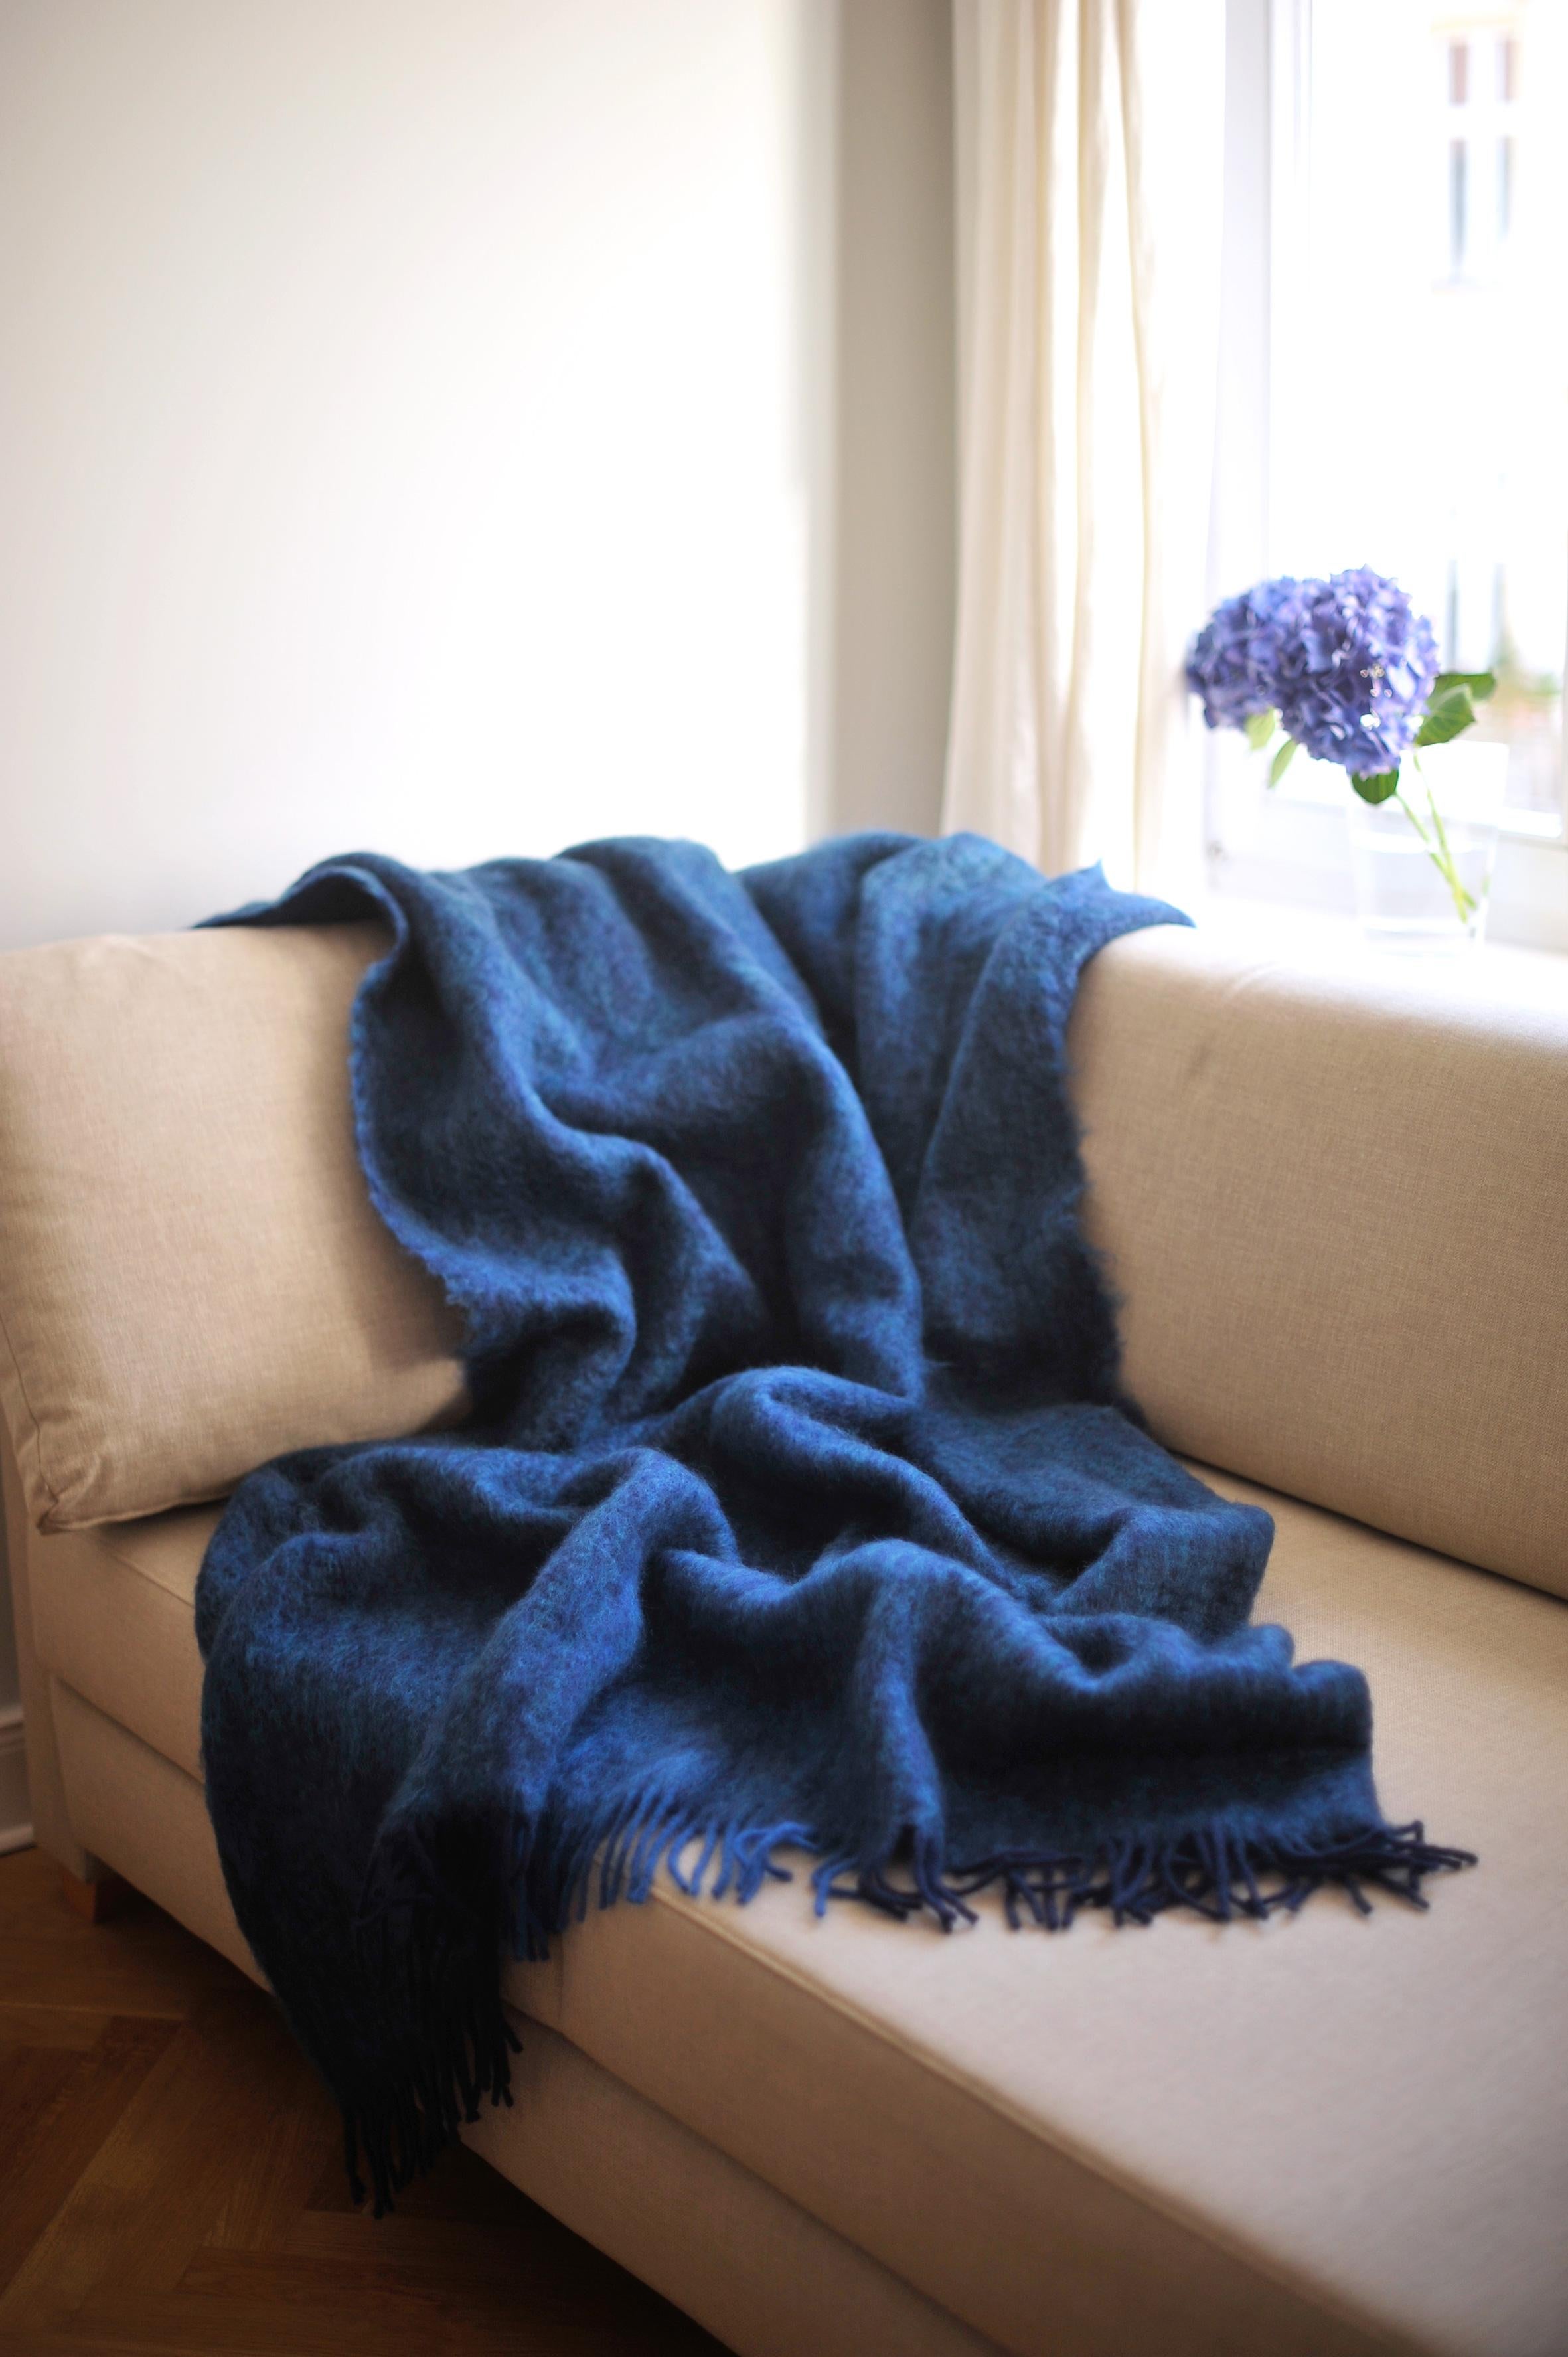 Designed in Berlin by Catharina Mende, woven of 50% mohair, 48% Wool, 2% polyamide in Spain: This blue flattering and warming fluffy mohair blanket is the perfect companion for every season - an indispensable favorite for the home or the